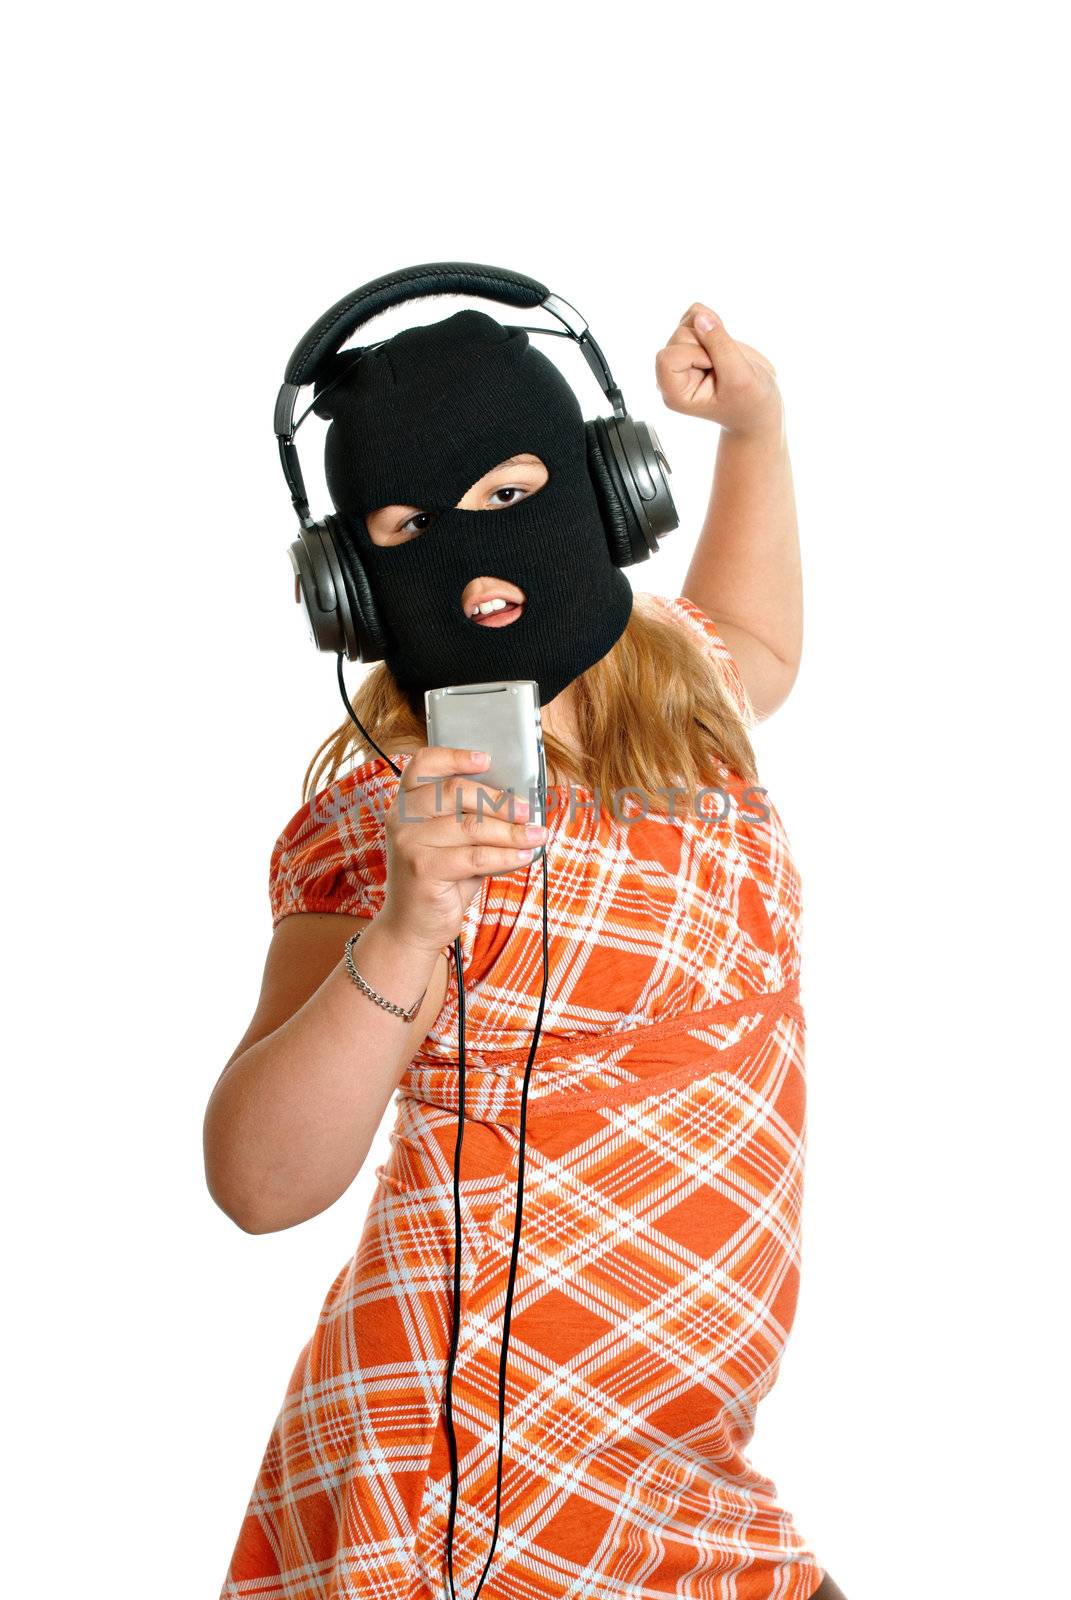 Concept image of a young girl dancing to pirated or illegal music downloads on her mp3 player, isolated against a white background.